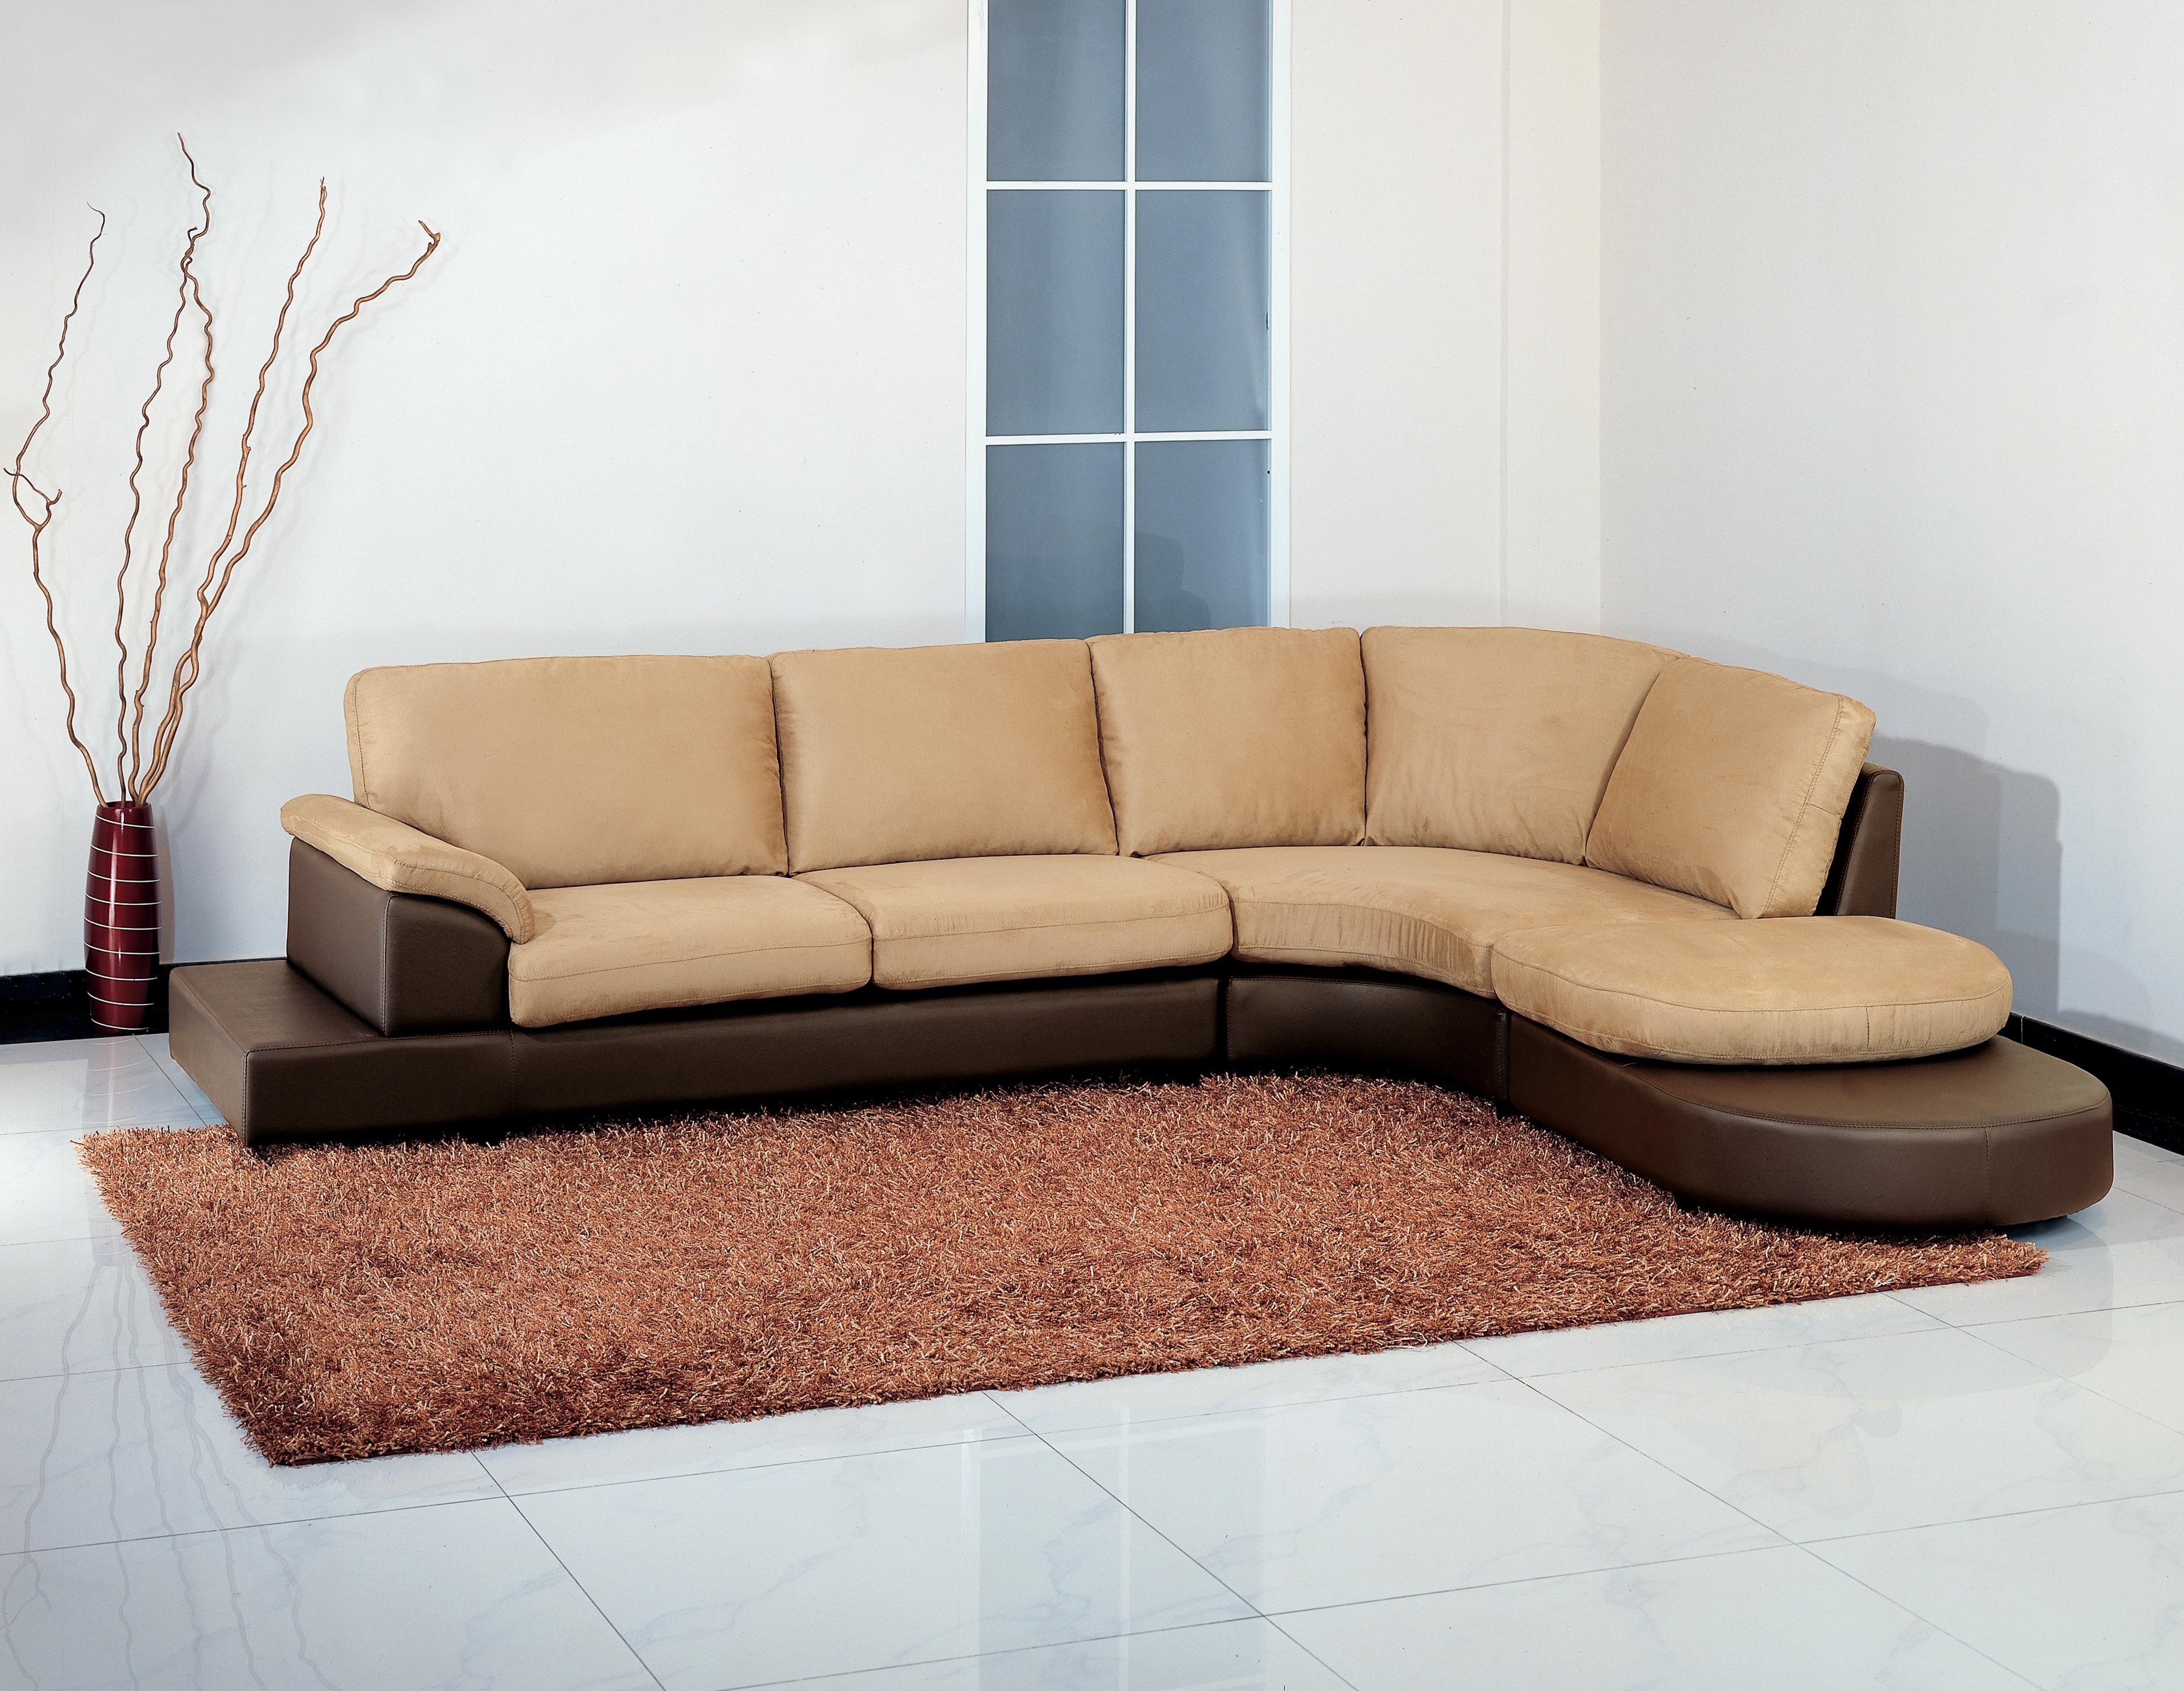 Abson Living Charlotte Beige Sectional Sofa And Ottoman Goodca Pertaining To Abbyson Living Charlotte Dark Brown Sectional Sofa And Ottoman (View 3 of 12)